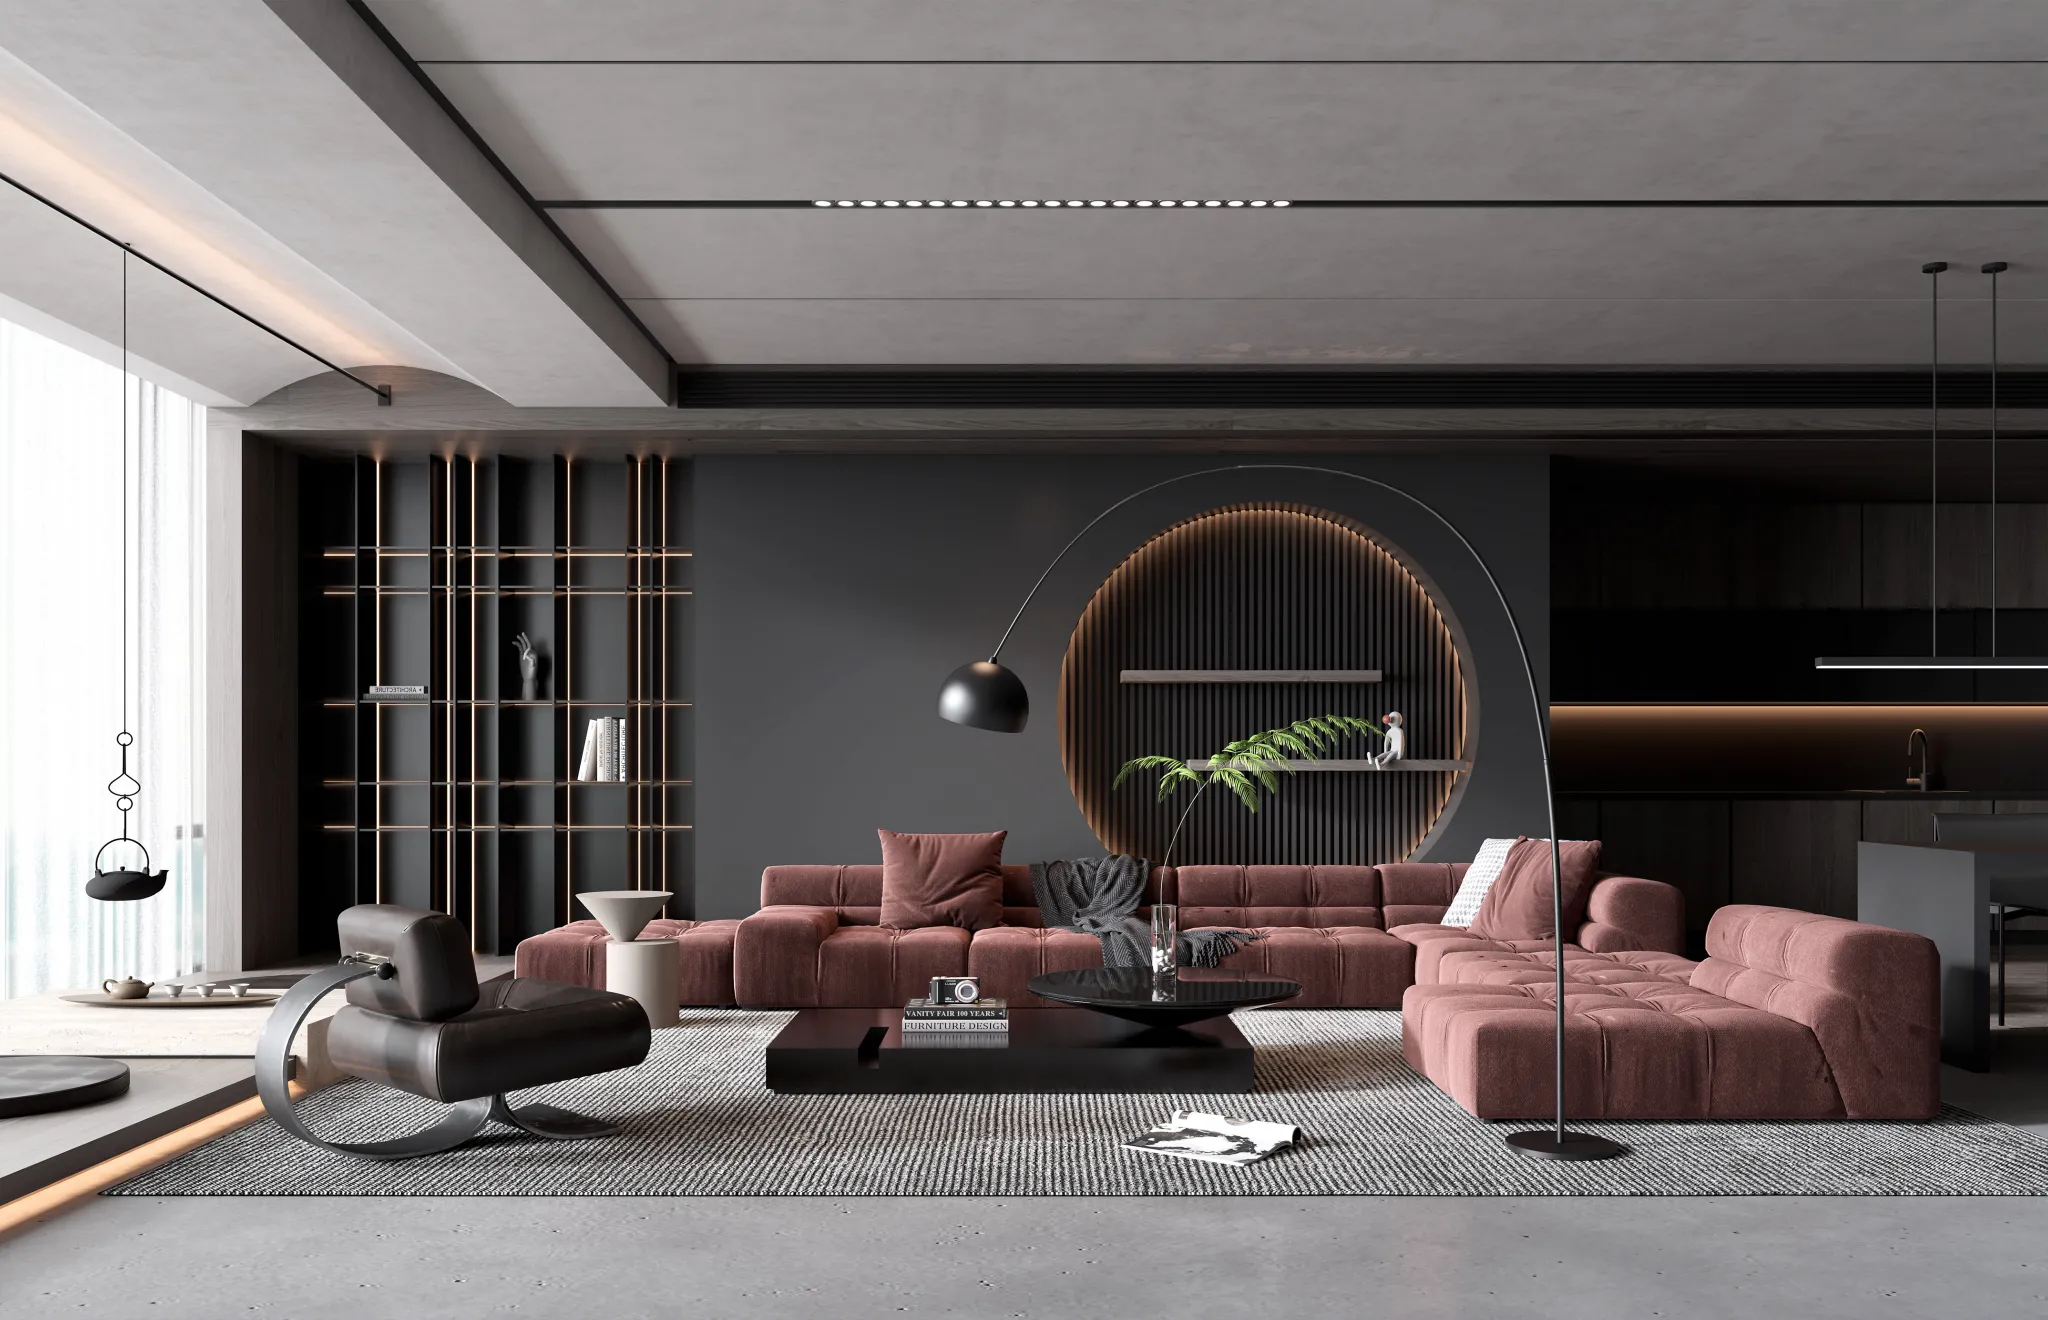 HOUSE SPACE 3D SCENES – LIVING ROOM – 0129